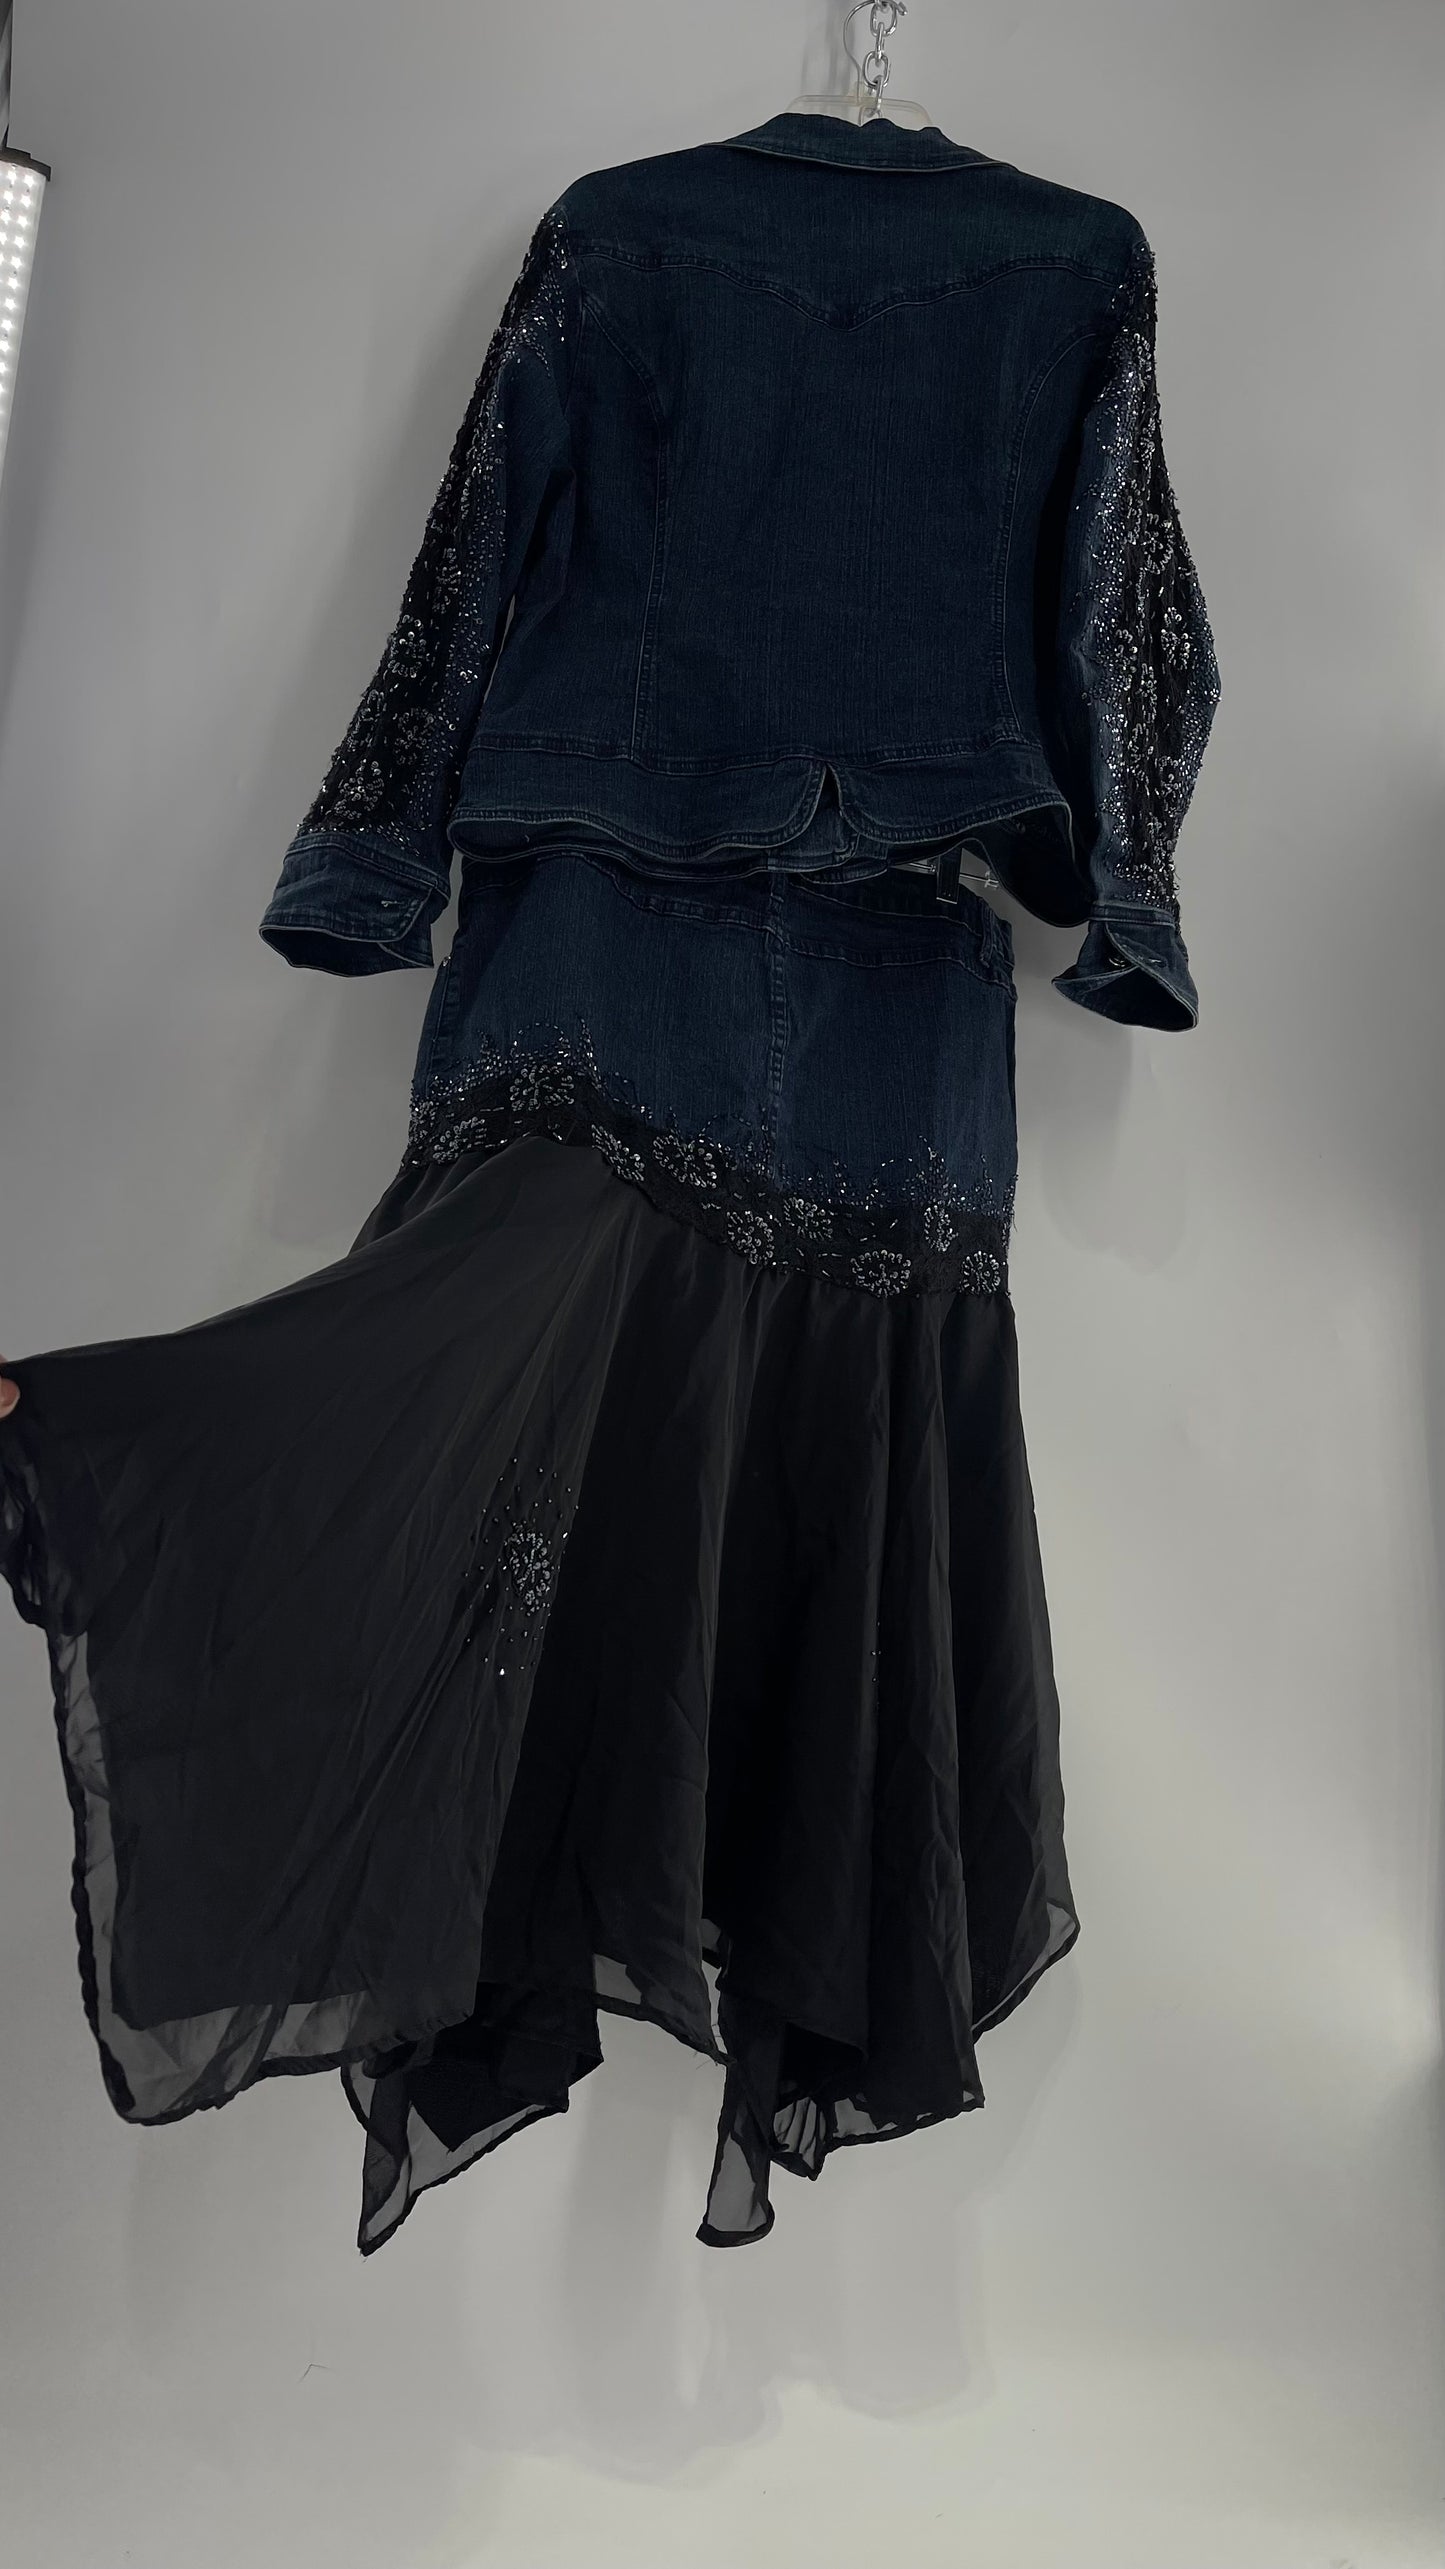 Vintage Ashley Stewart Denim Skirt and Button Up Set with Black Embroidered and Beaded Lace Details + Handkerchief Skirt (16W)